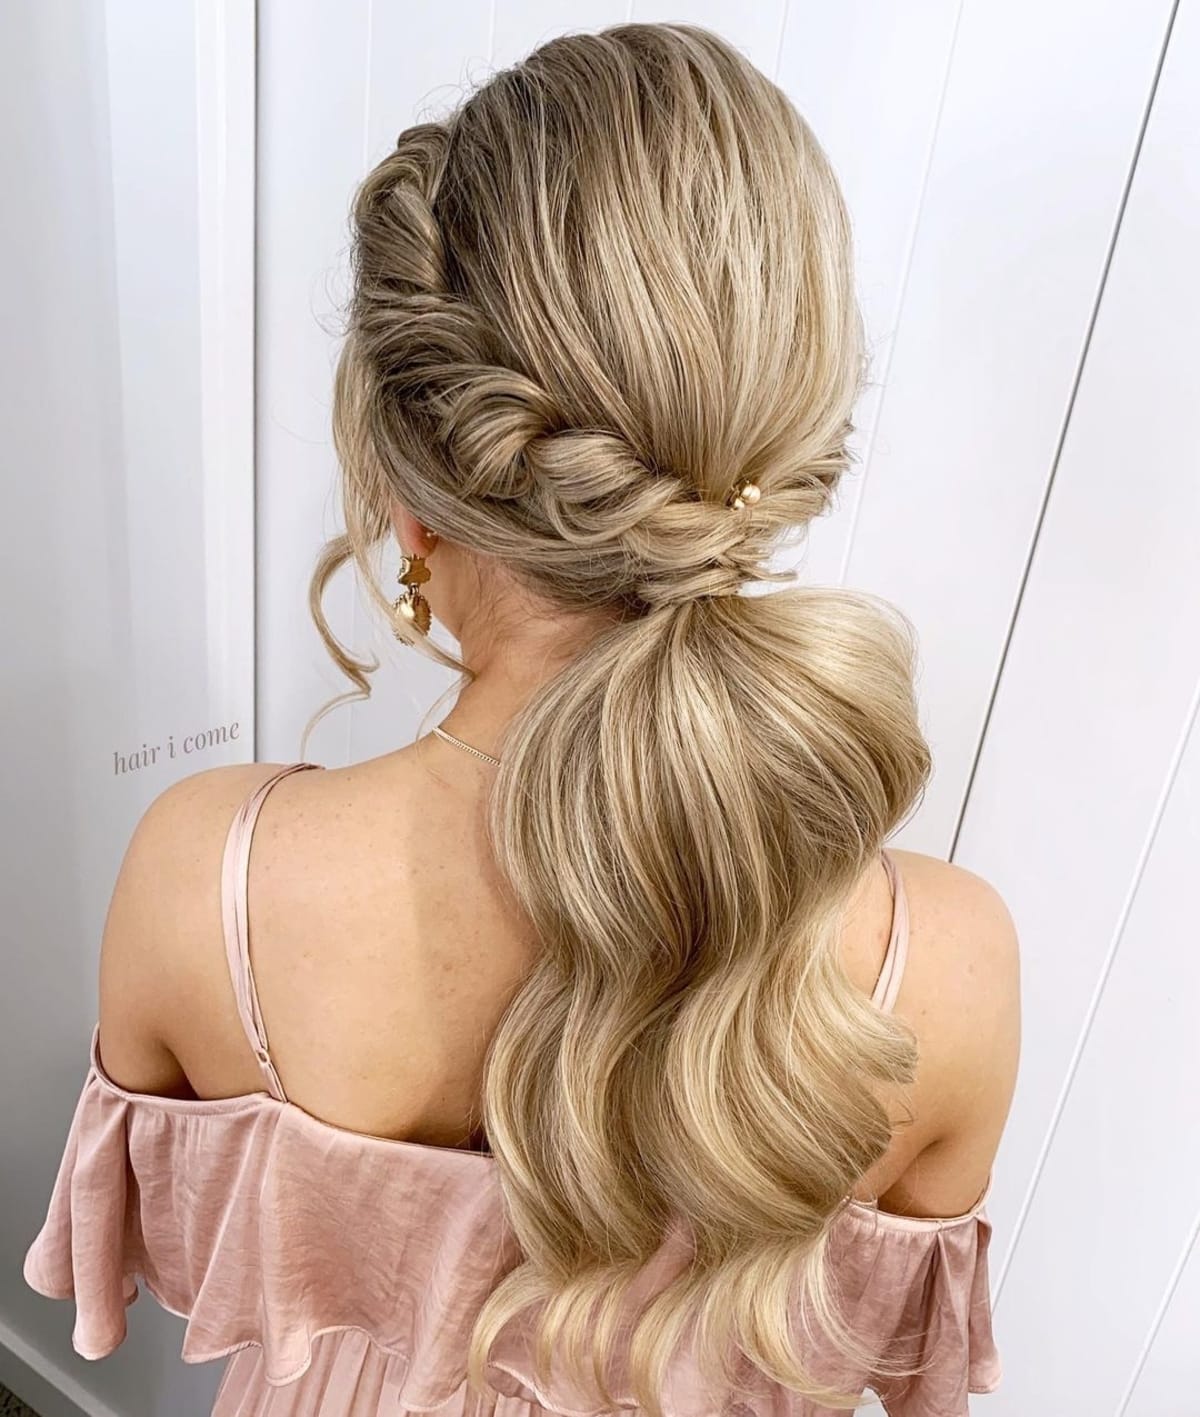 39 Casual Hairstyles That Are Quick, Chic and Easy for 2023